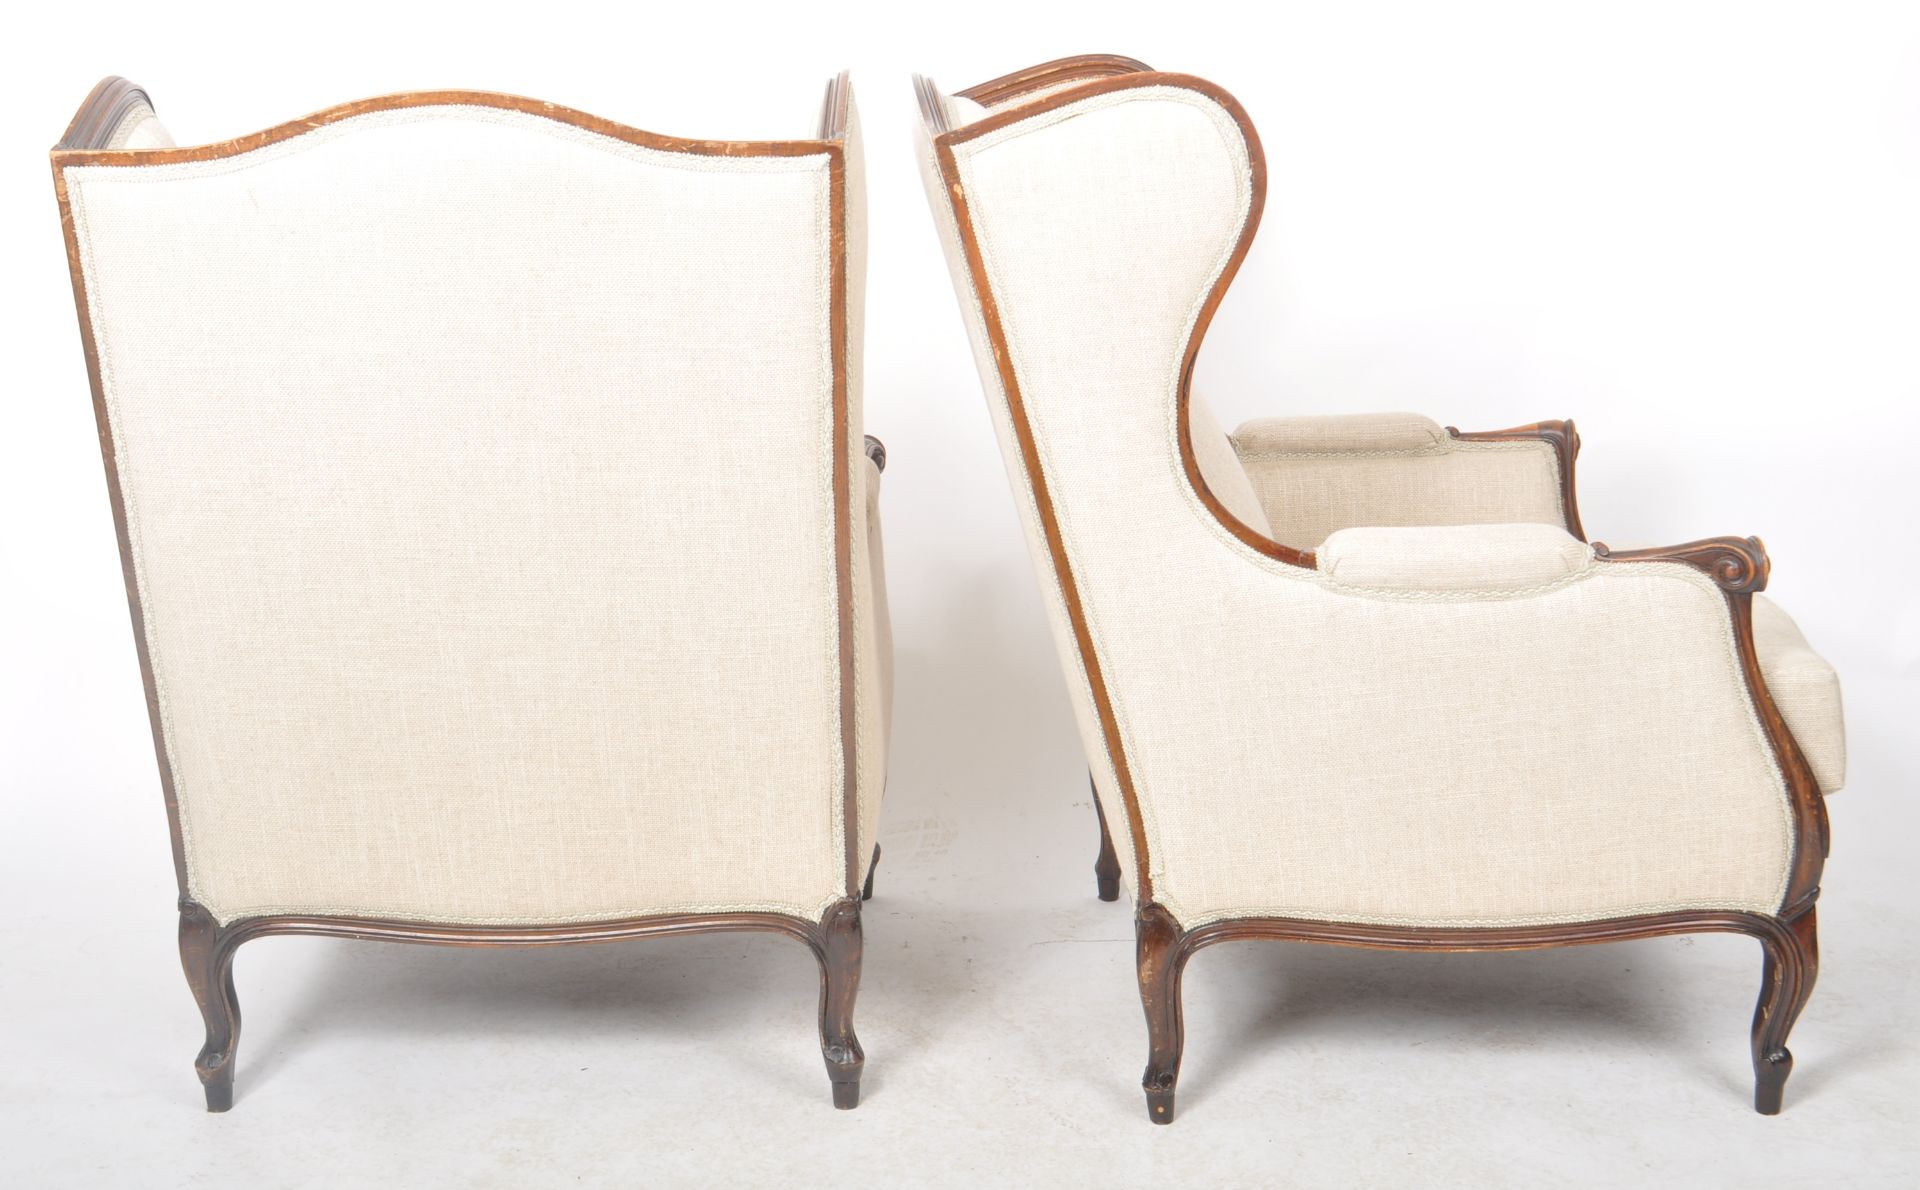 MATCHING PAIR OF 19TH CENTURY FRENCH WINGBACK ARMCHAIRS - Image 7 of 7